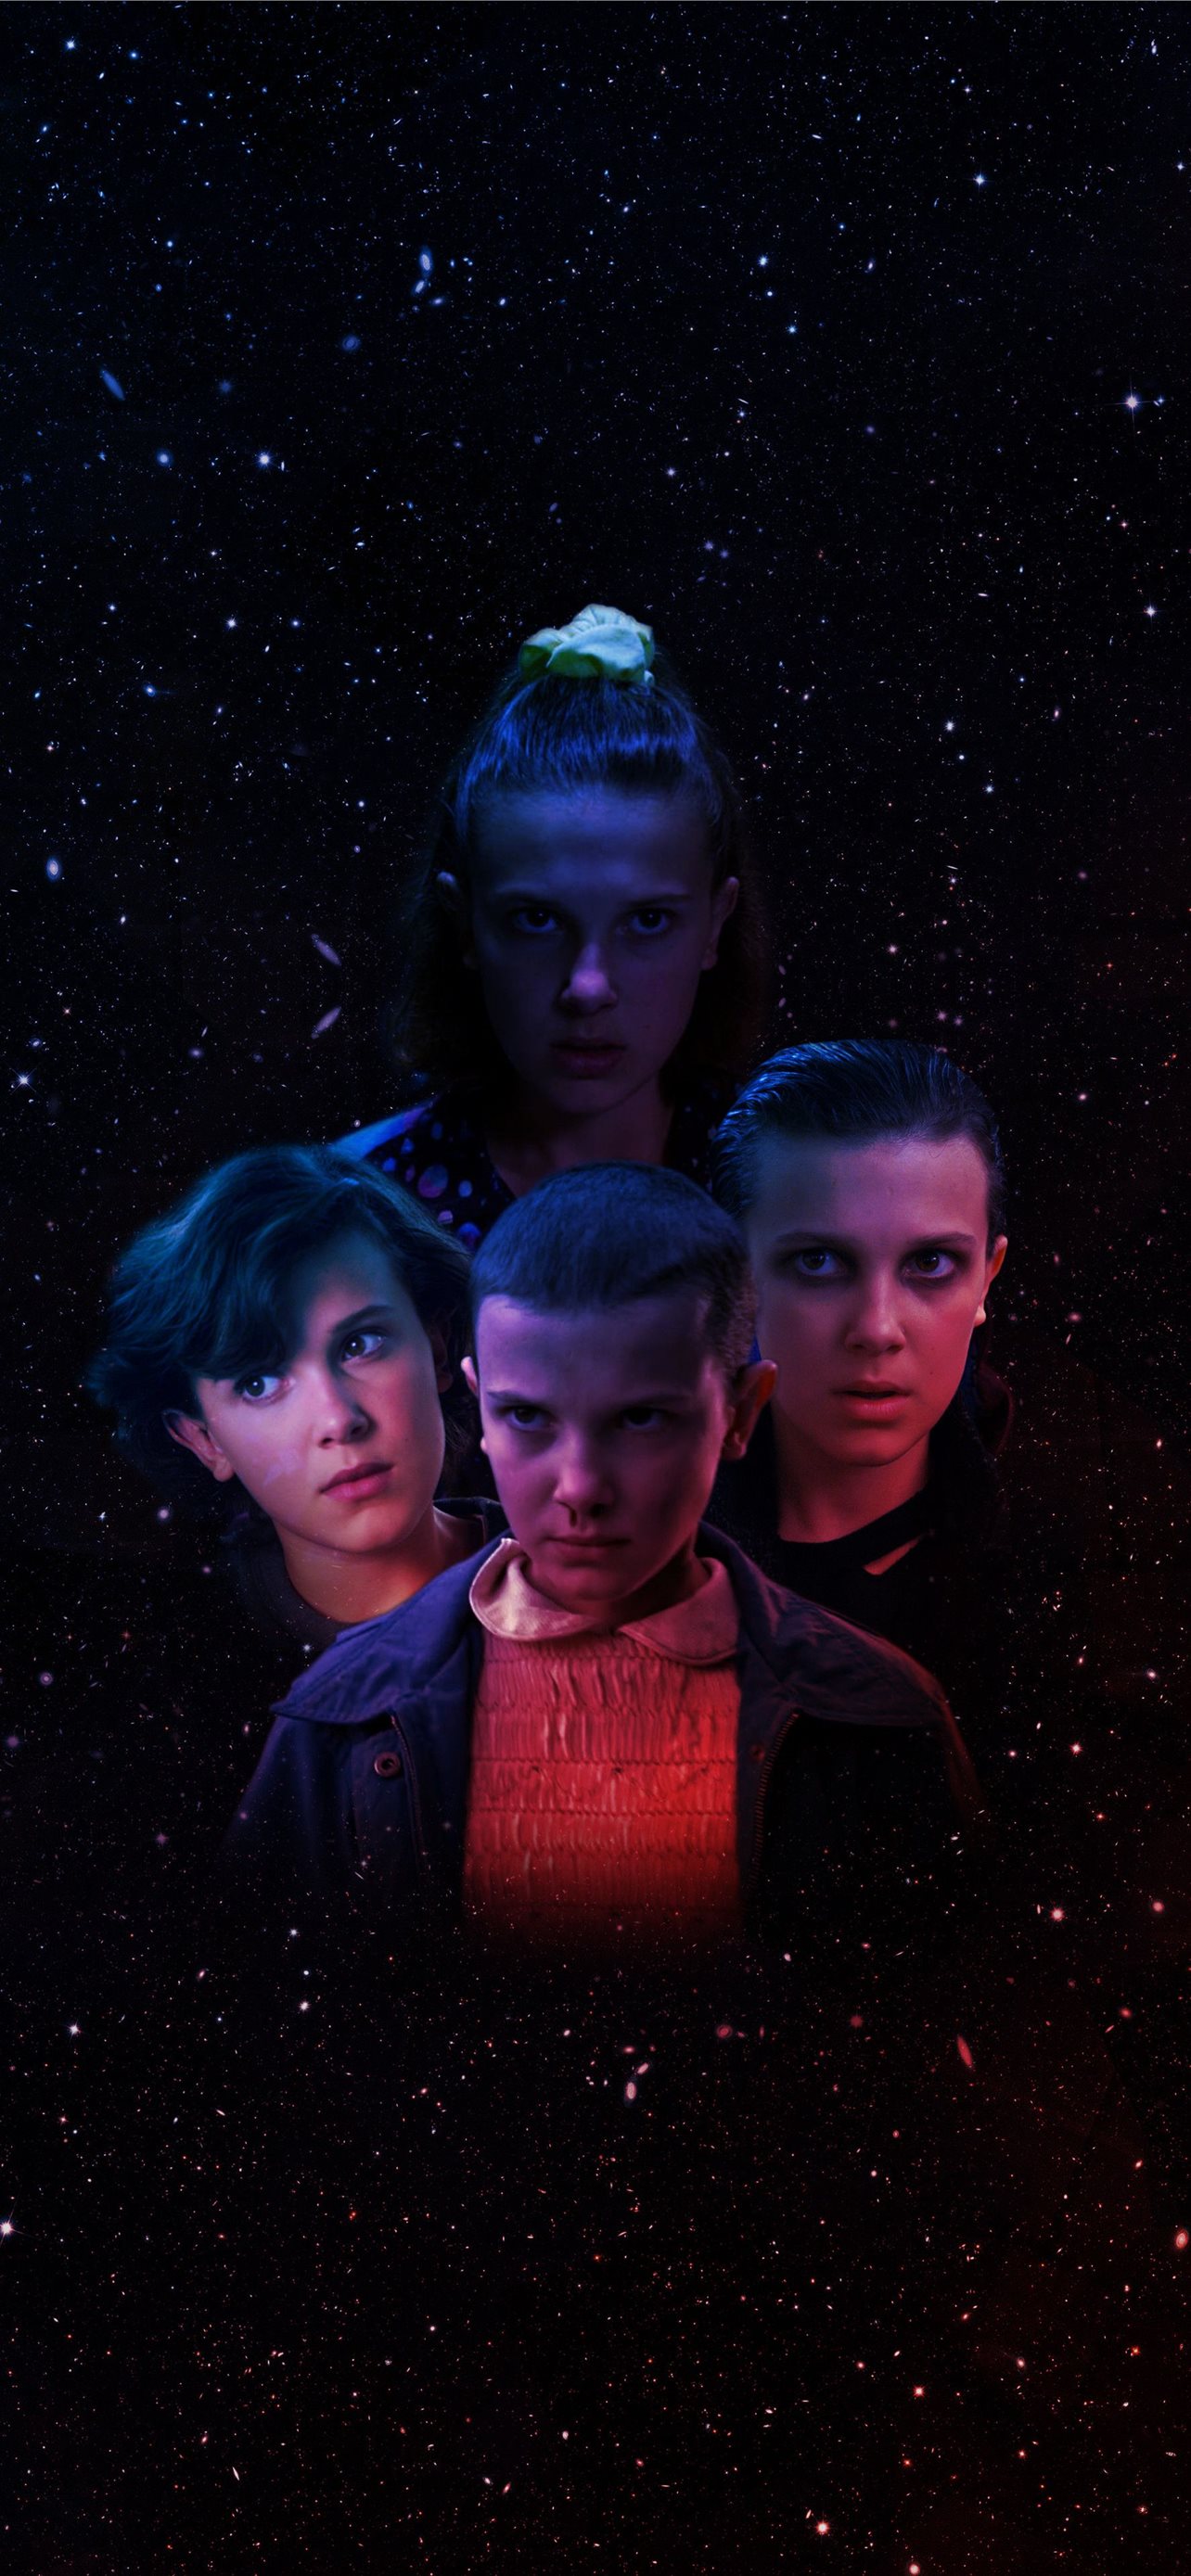 Stranger Things 4 HD Movies Wallpapers  HD Wallpapers  ID 35805